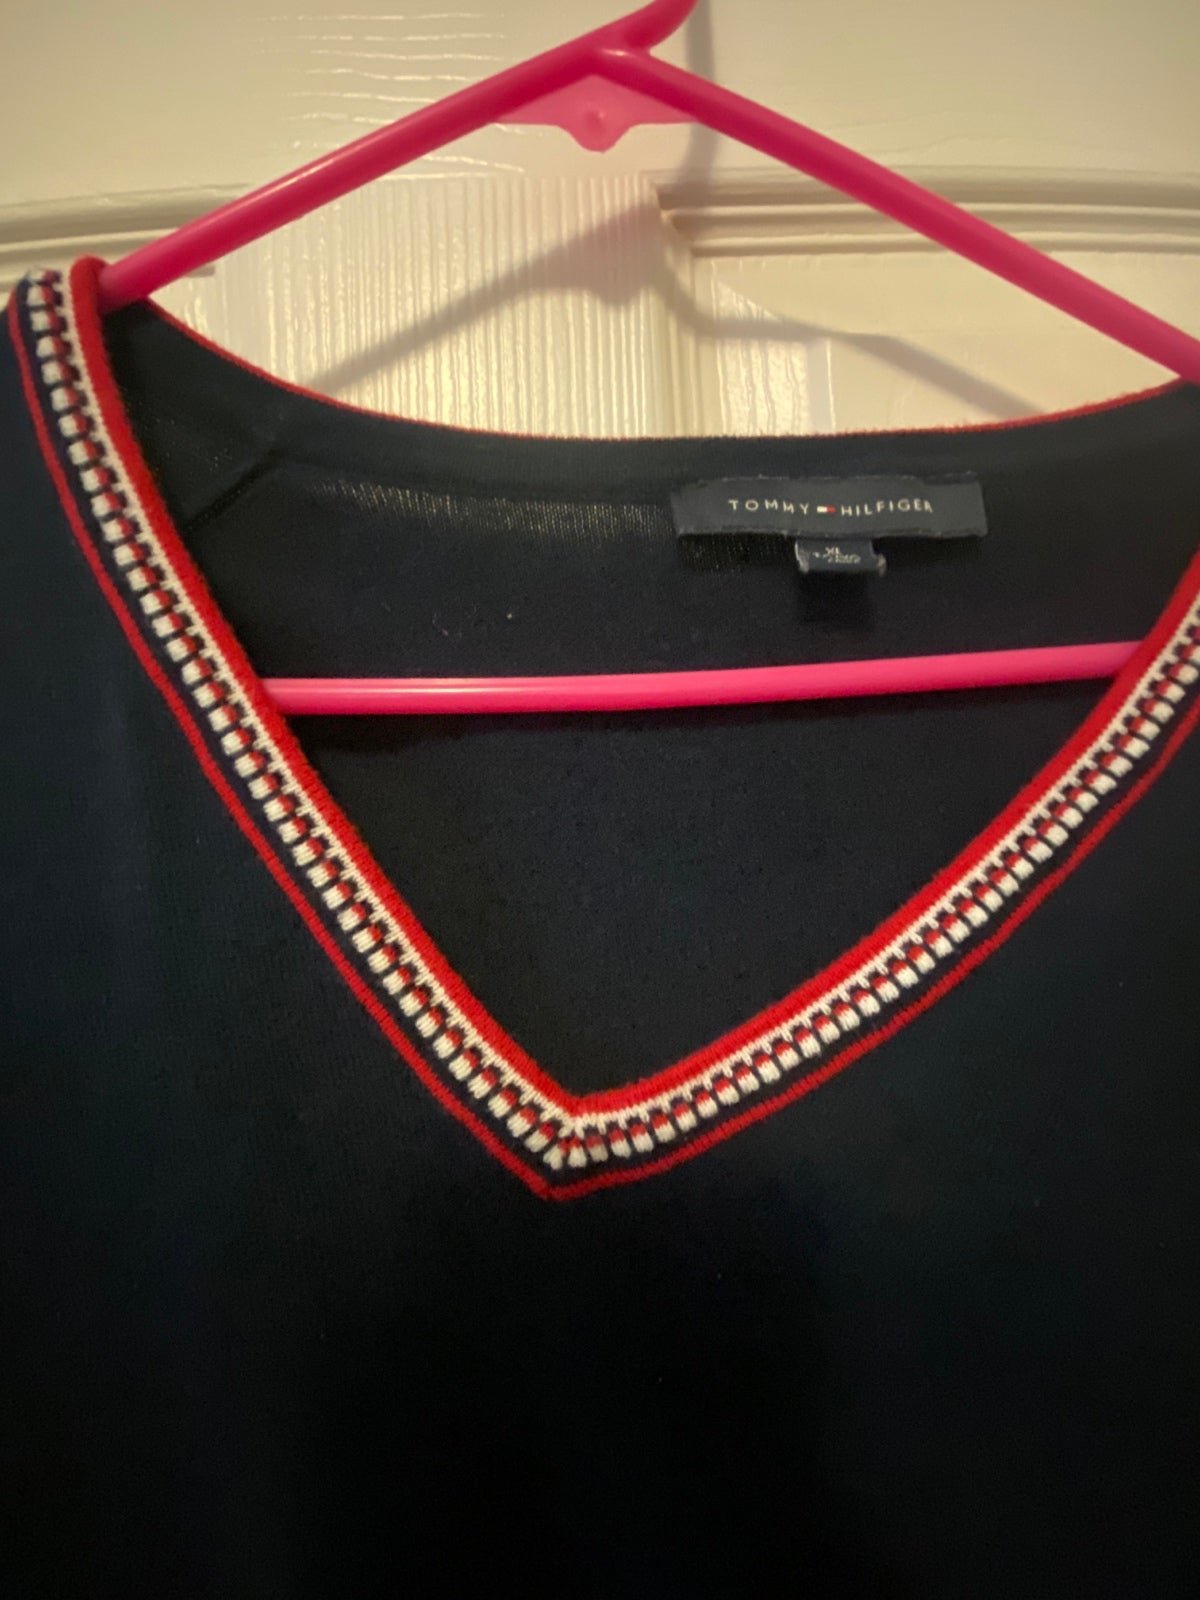 cheapest place to buy  Tommy Hilfiger sweater llORobapo Wholesale